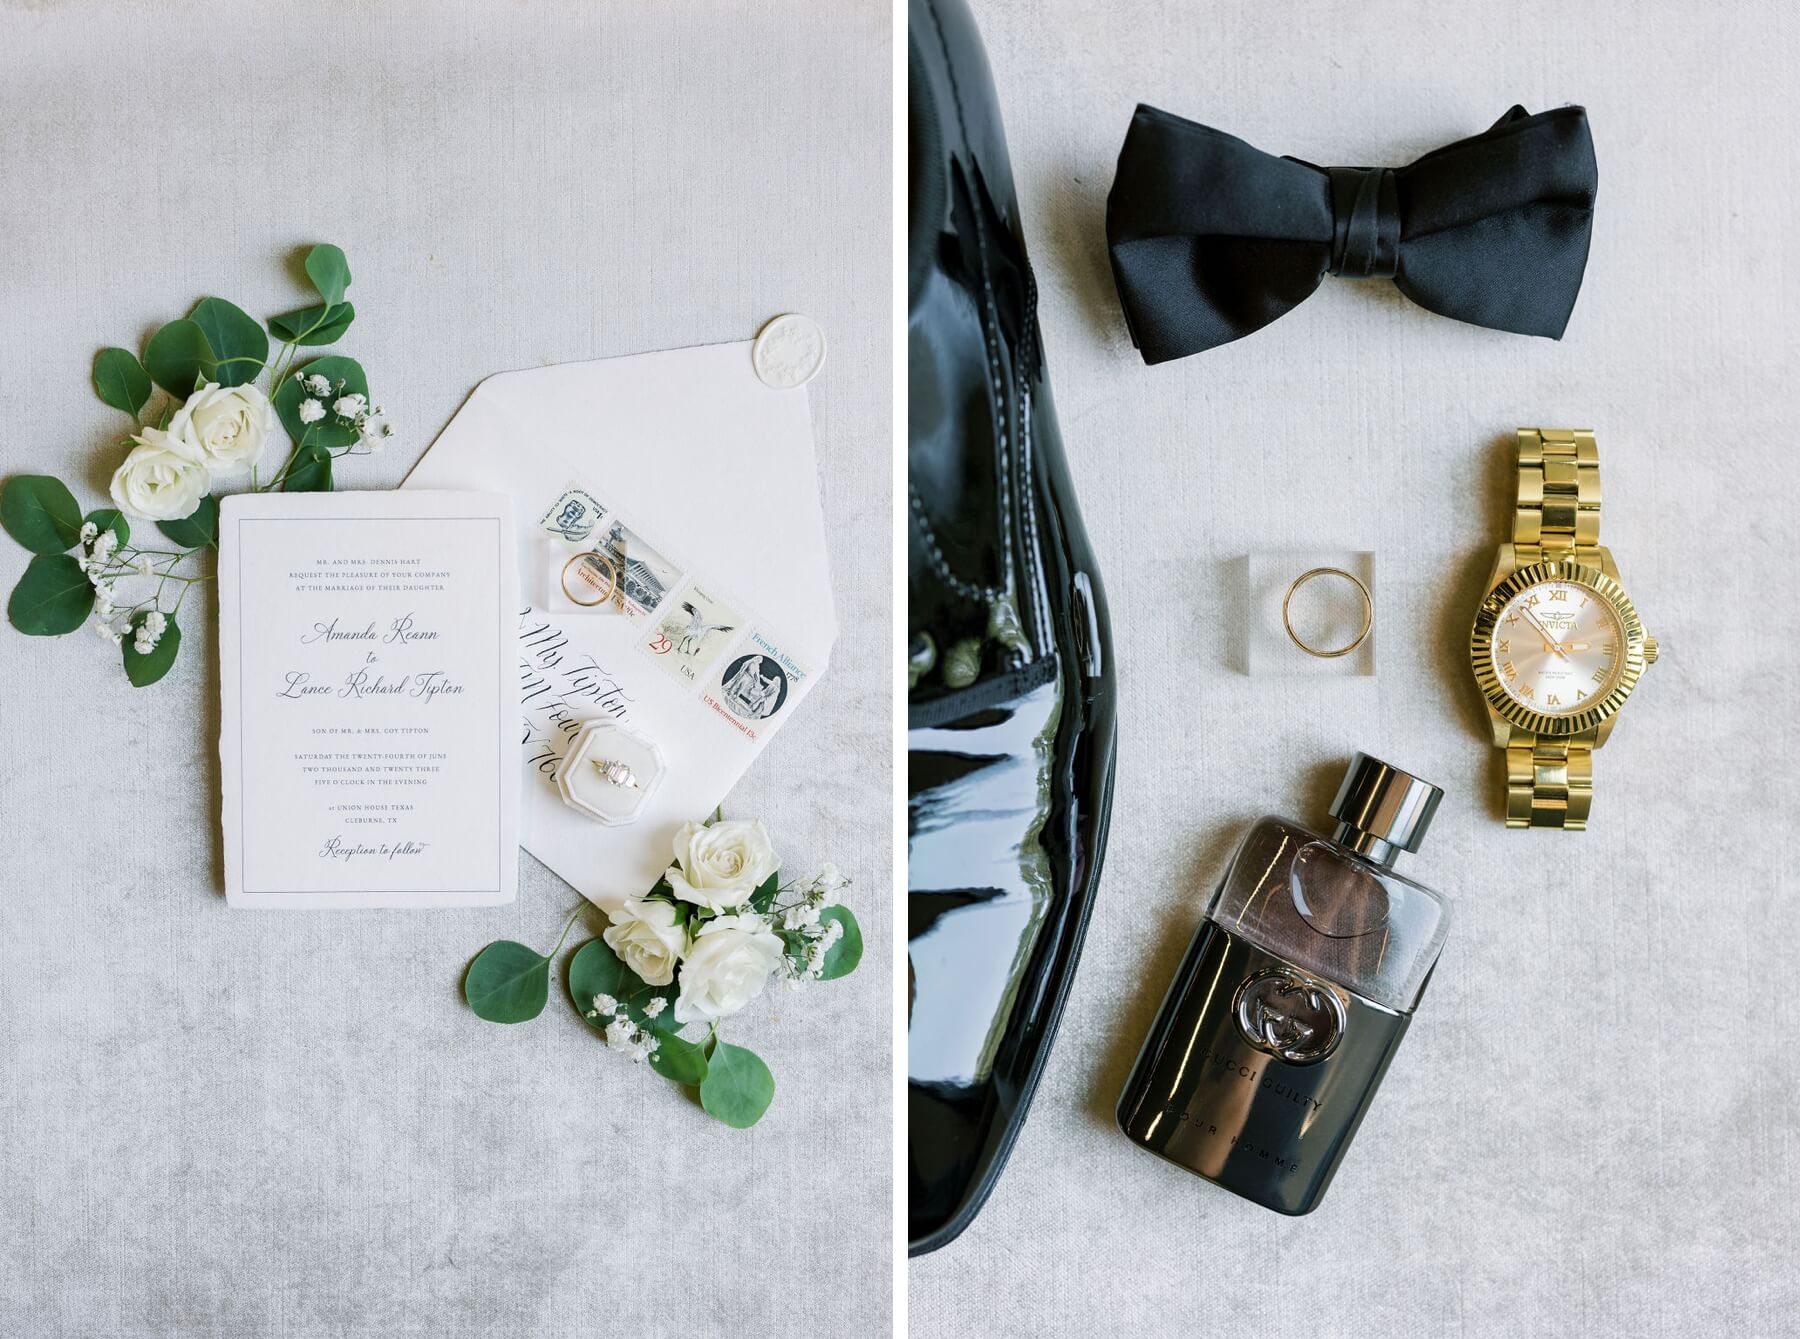 White wedding invitation with white flowers and greenery and groom's bow tie, shoes, watch, and cologne